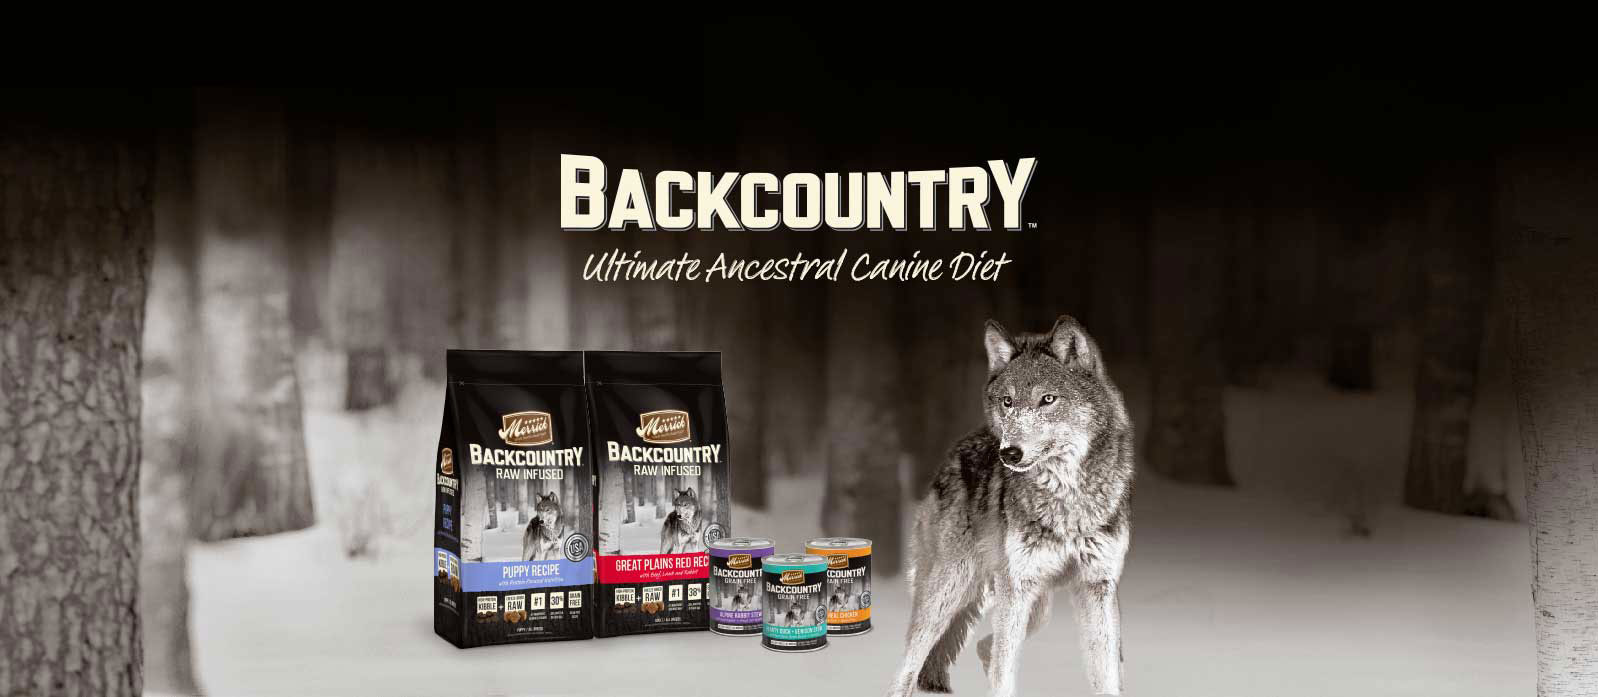 merrick backcountry ultimate ancestral canine diet dog food